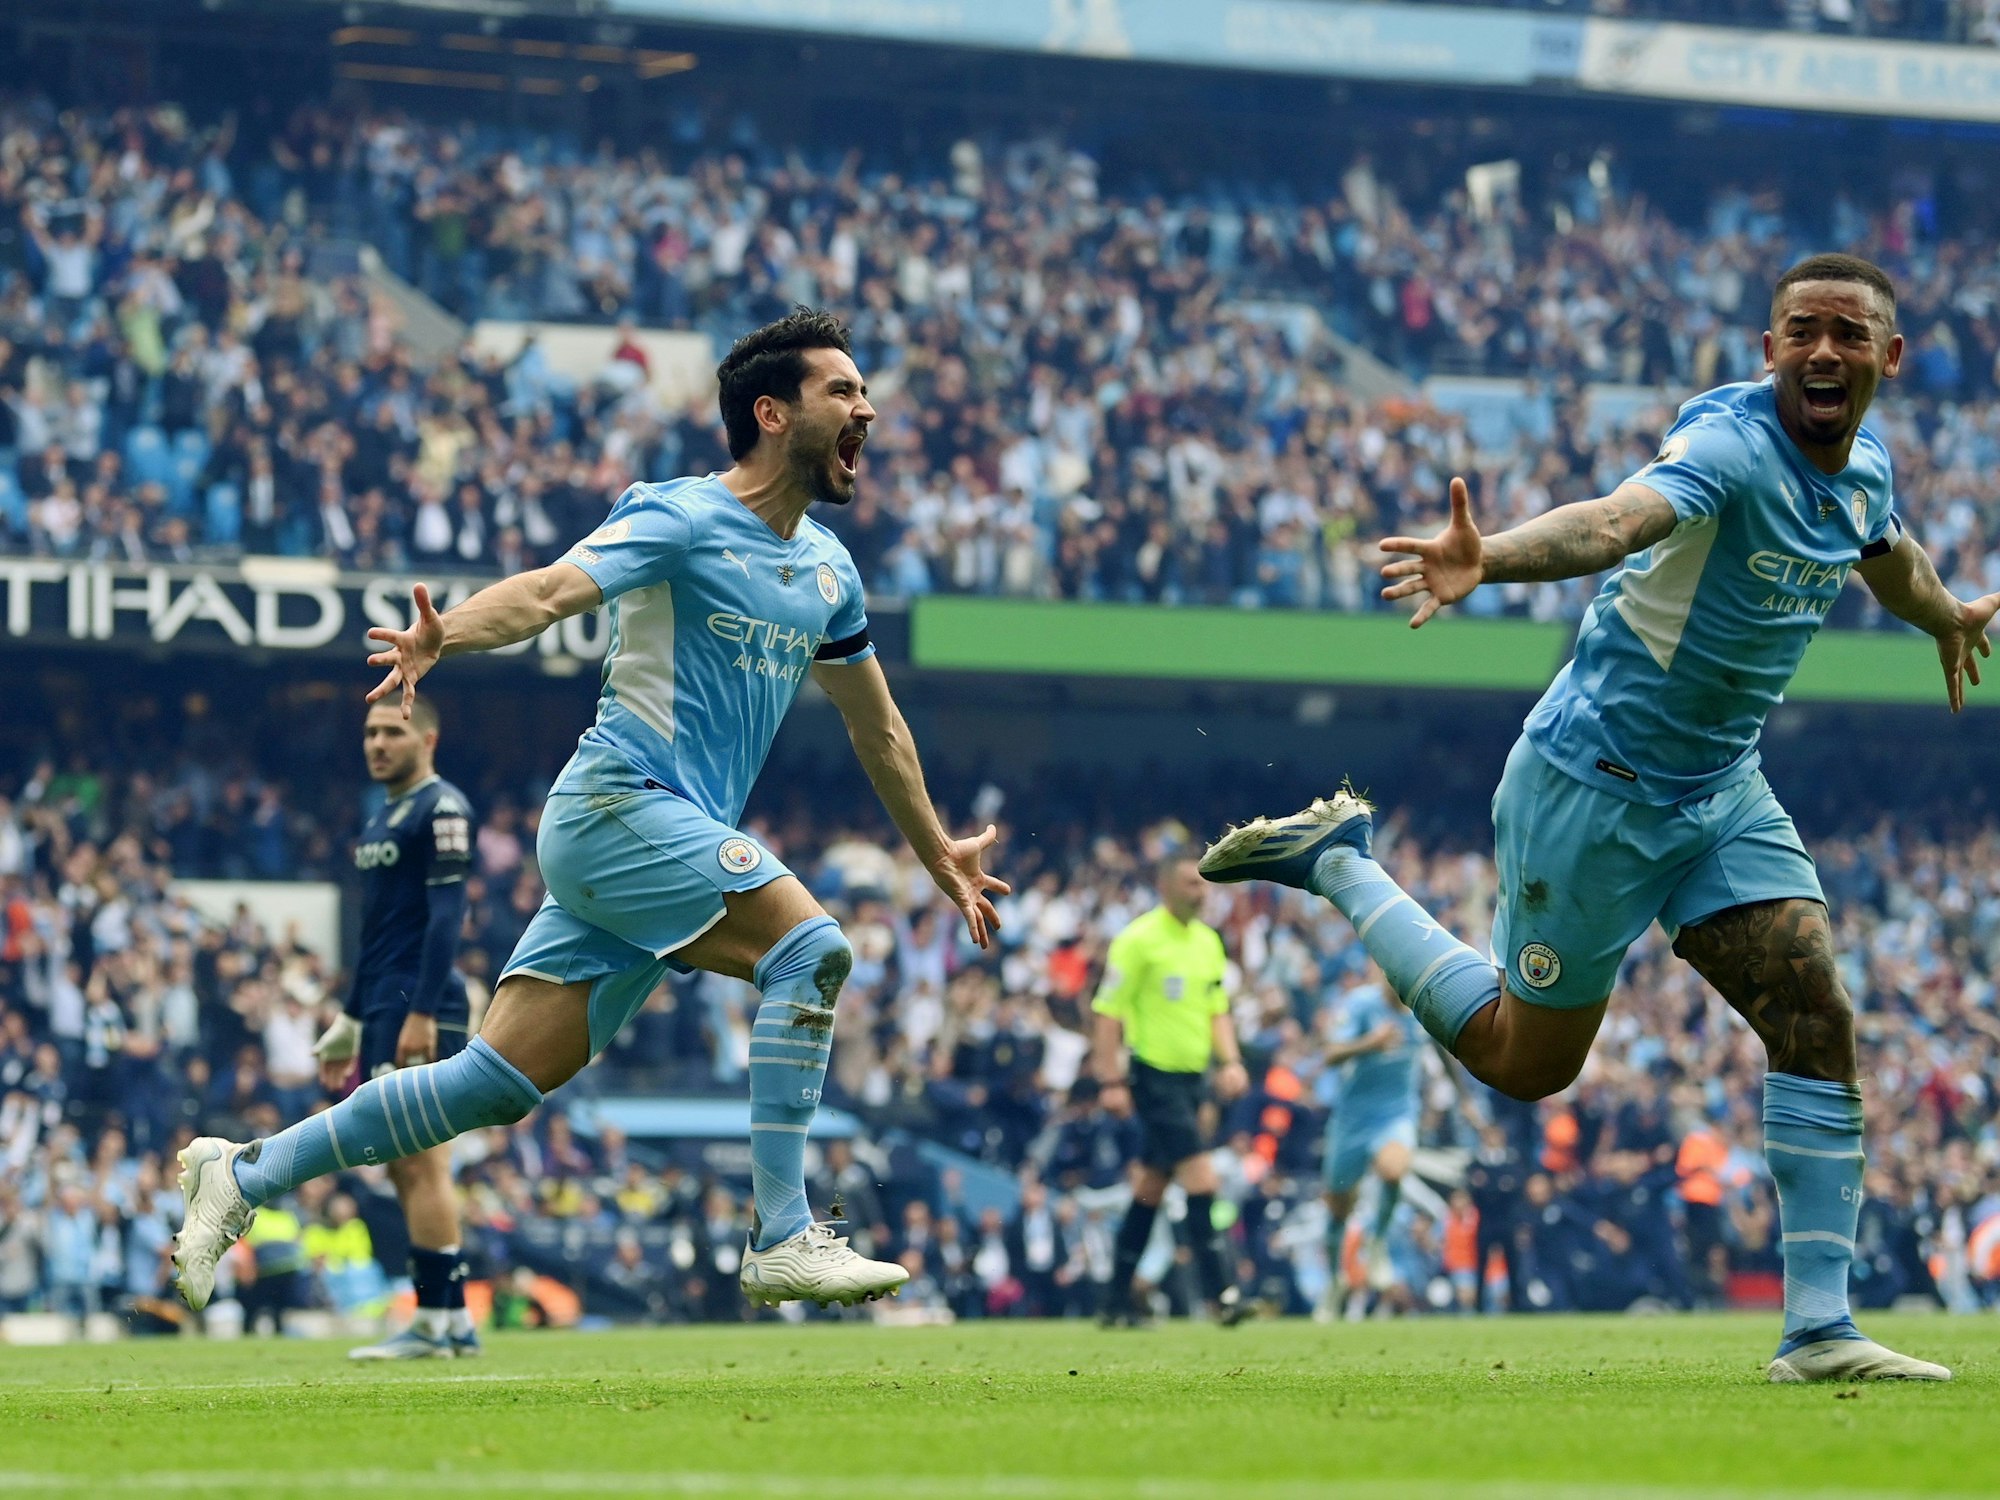 MANCHESTER, ENGLAND - MAY 22: Ilkay Guendogan of Manchester City celebrates after scoring their team's third goal during the Premier League match between Manchester City and Aston Villa at Etihad Stadium on May 22, 2022 in Manchester, England. (Photo by Michael Regan/Getty Images)